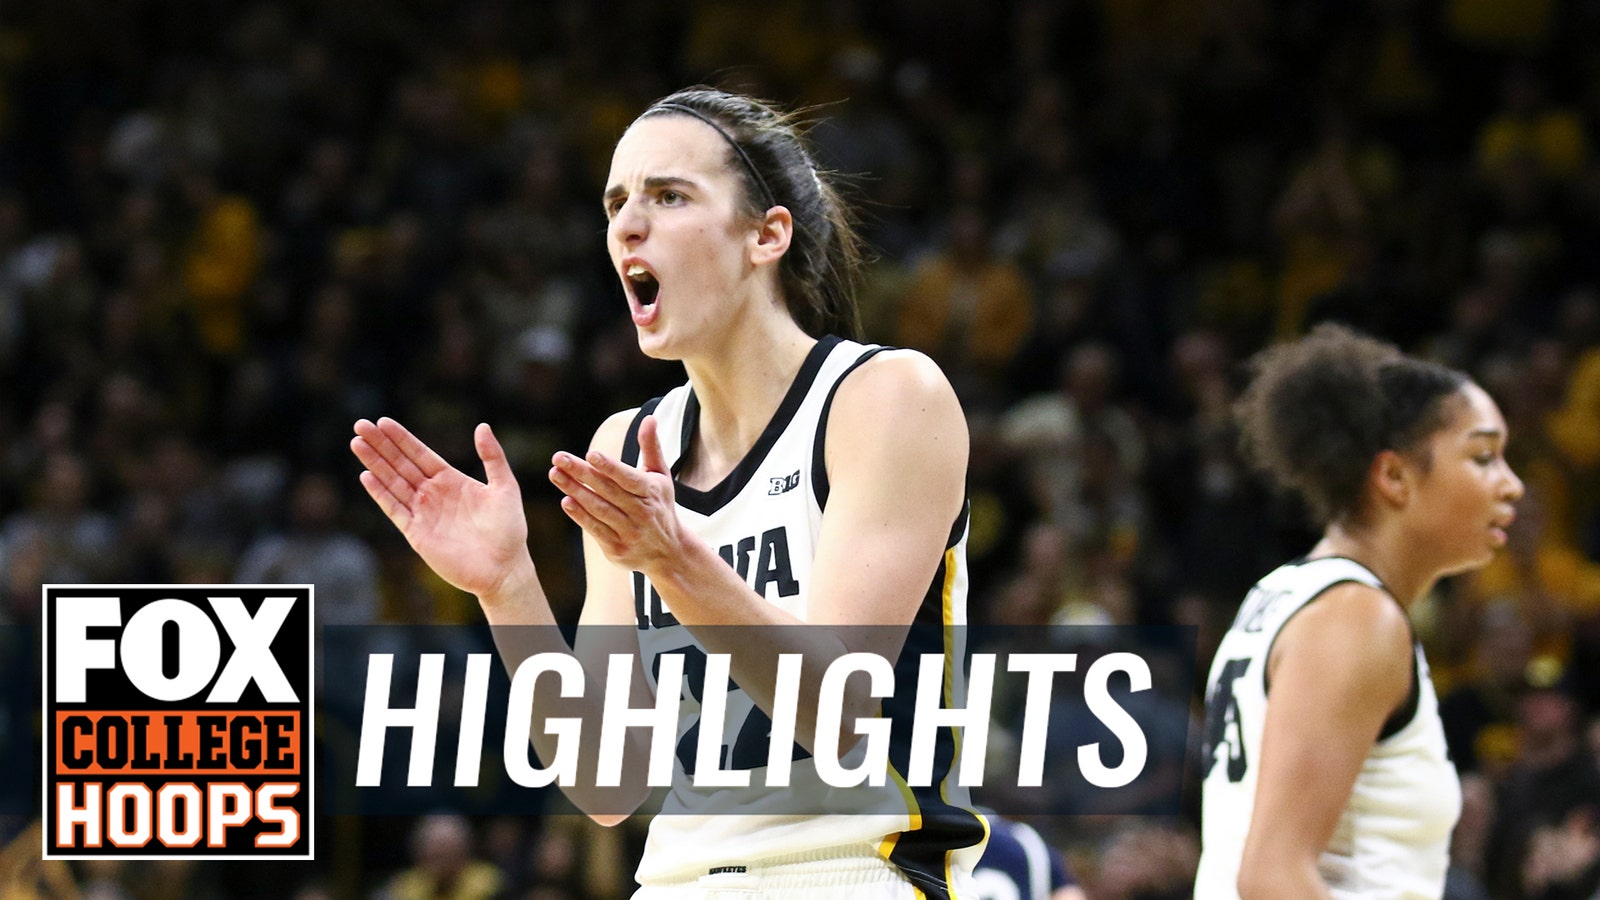 Caitlin Clark tallies 27 points and 15 assists in Iowa's 111-93 victory over Penn State